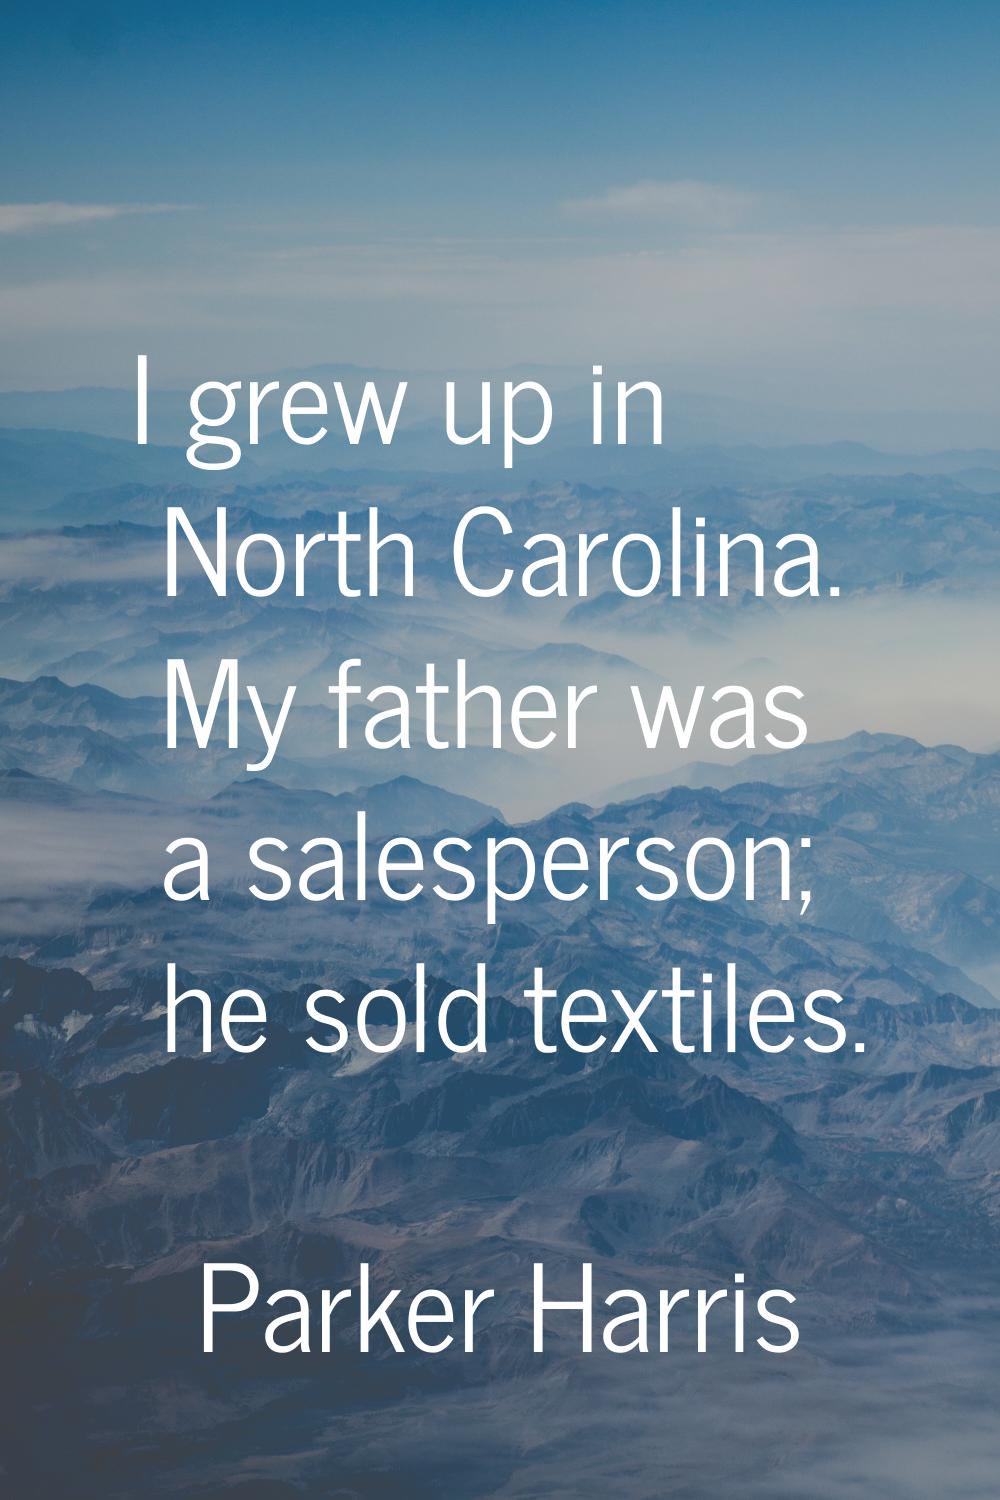 I grew up in North Carolina. My father was a salesperson; he sold textiles.